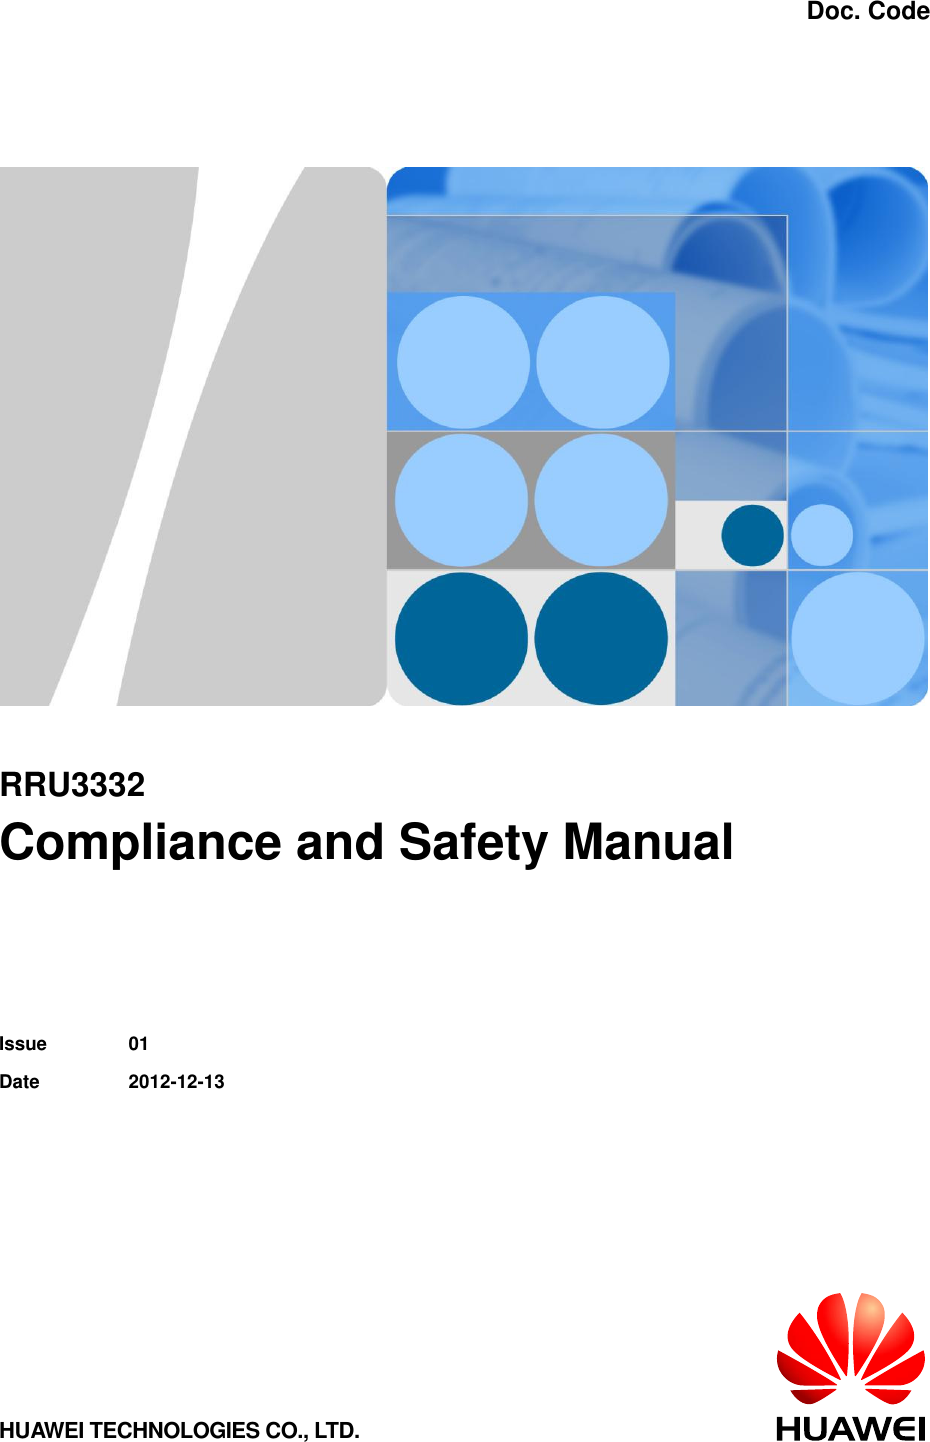    Doc. Code    RRU3332 Compliance and Safety Manual   Issue 01 Date 2012-12-13  HUAWEI TECHNOLOGIES CO., LTD.  